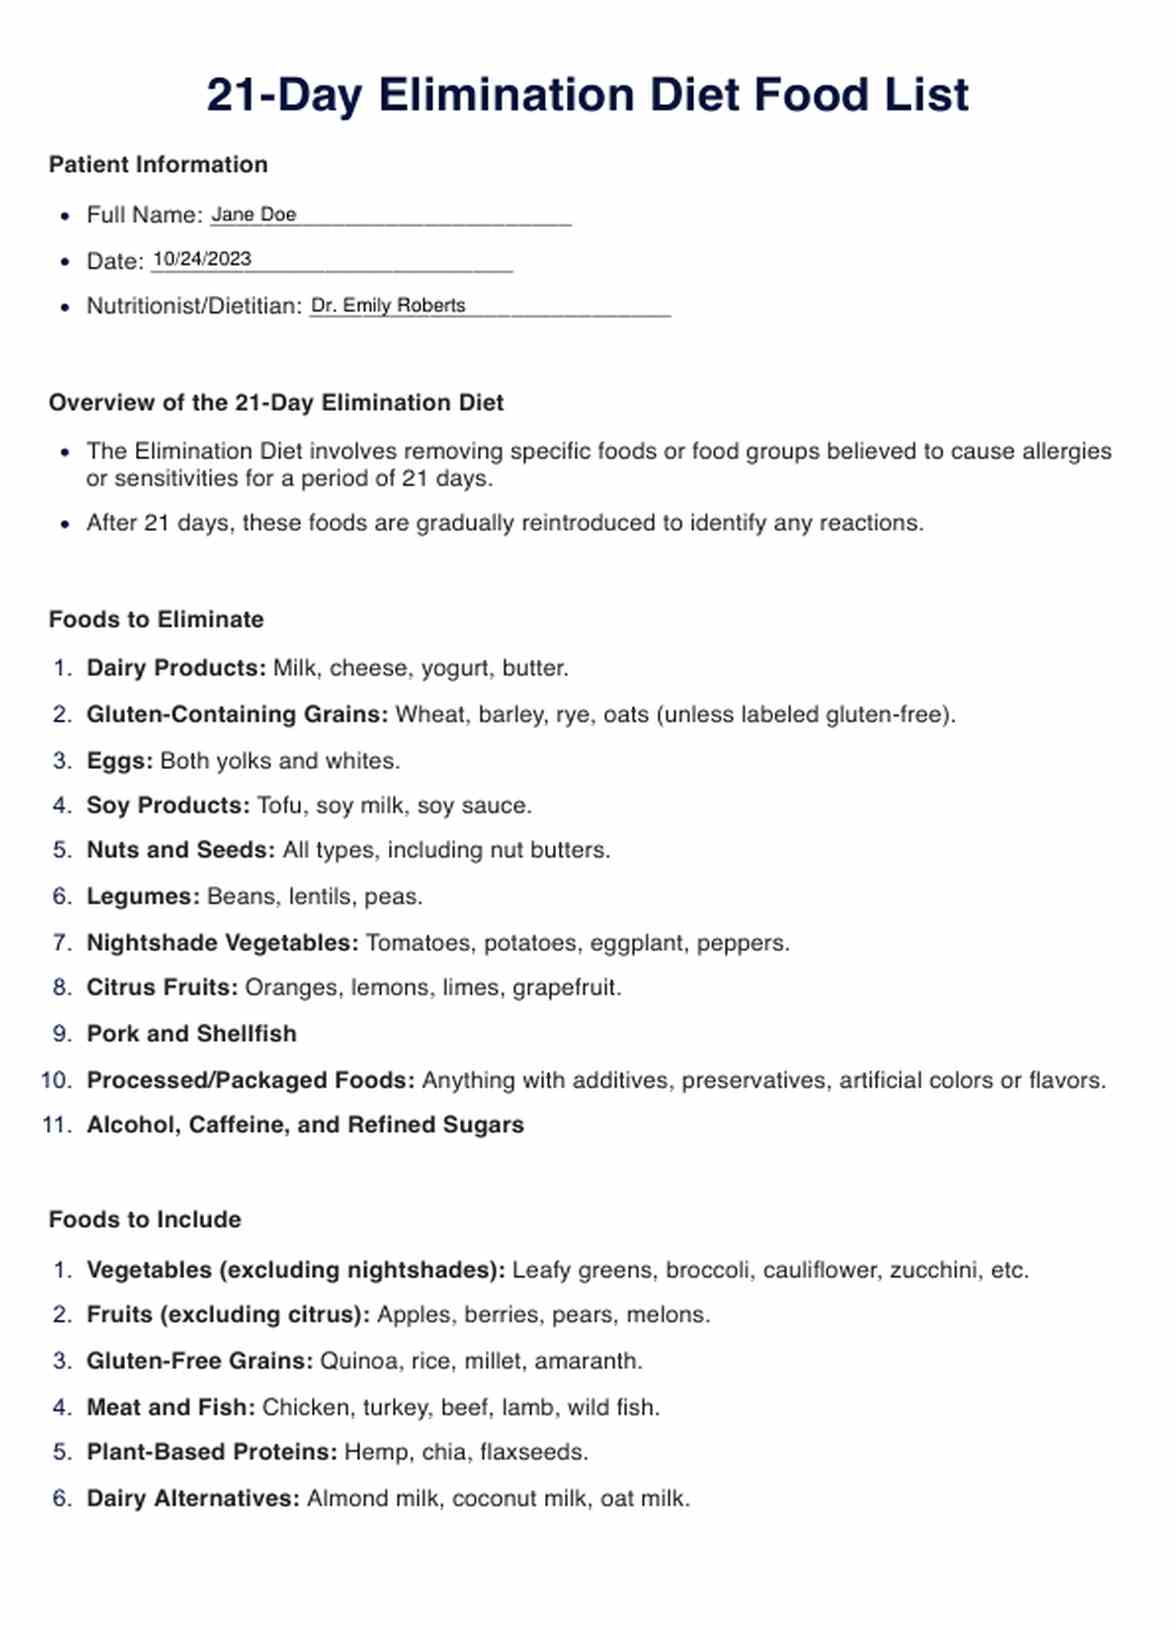 21 Day Elimination Diet Food List PDF Example